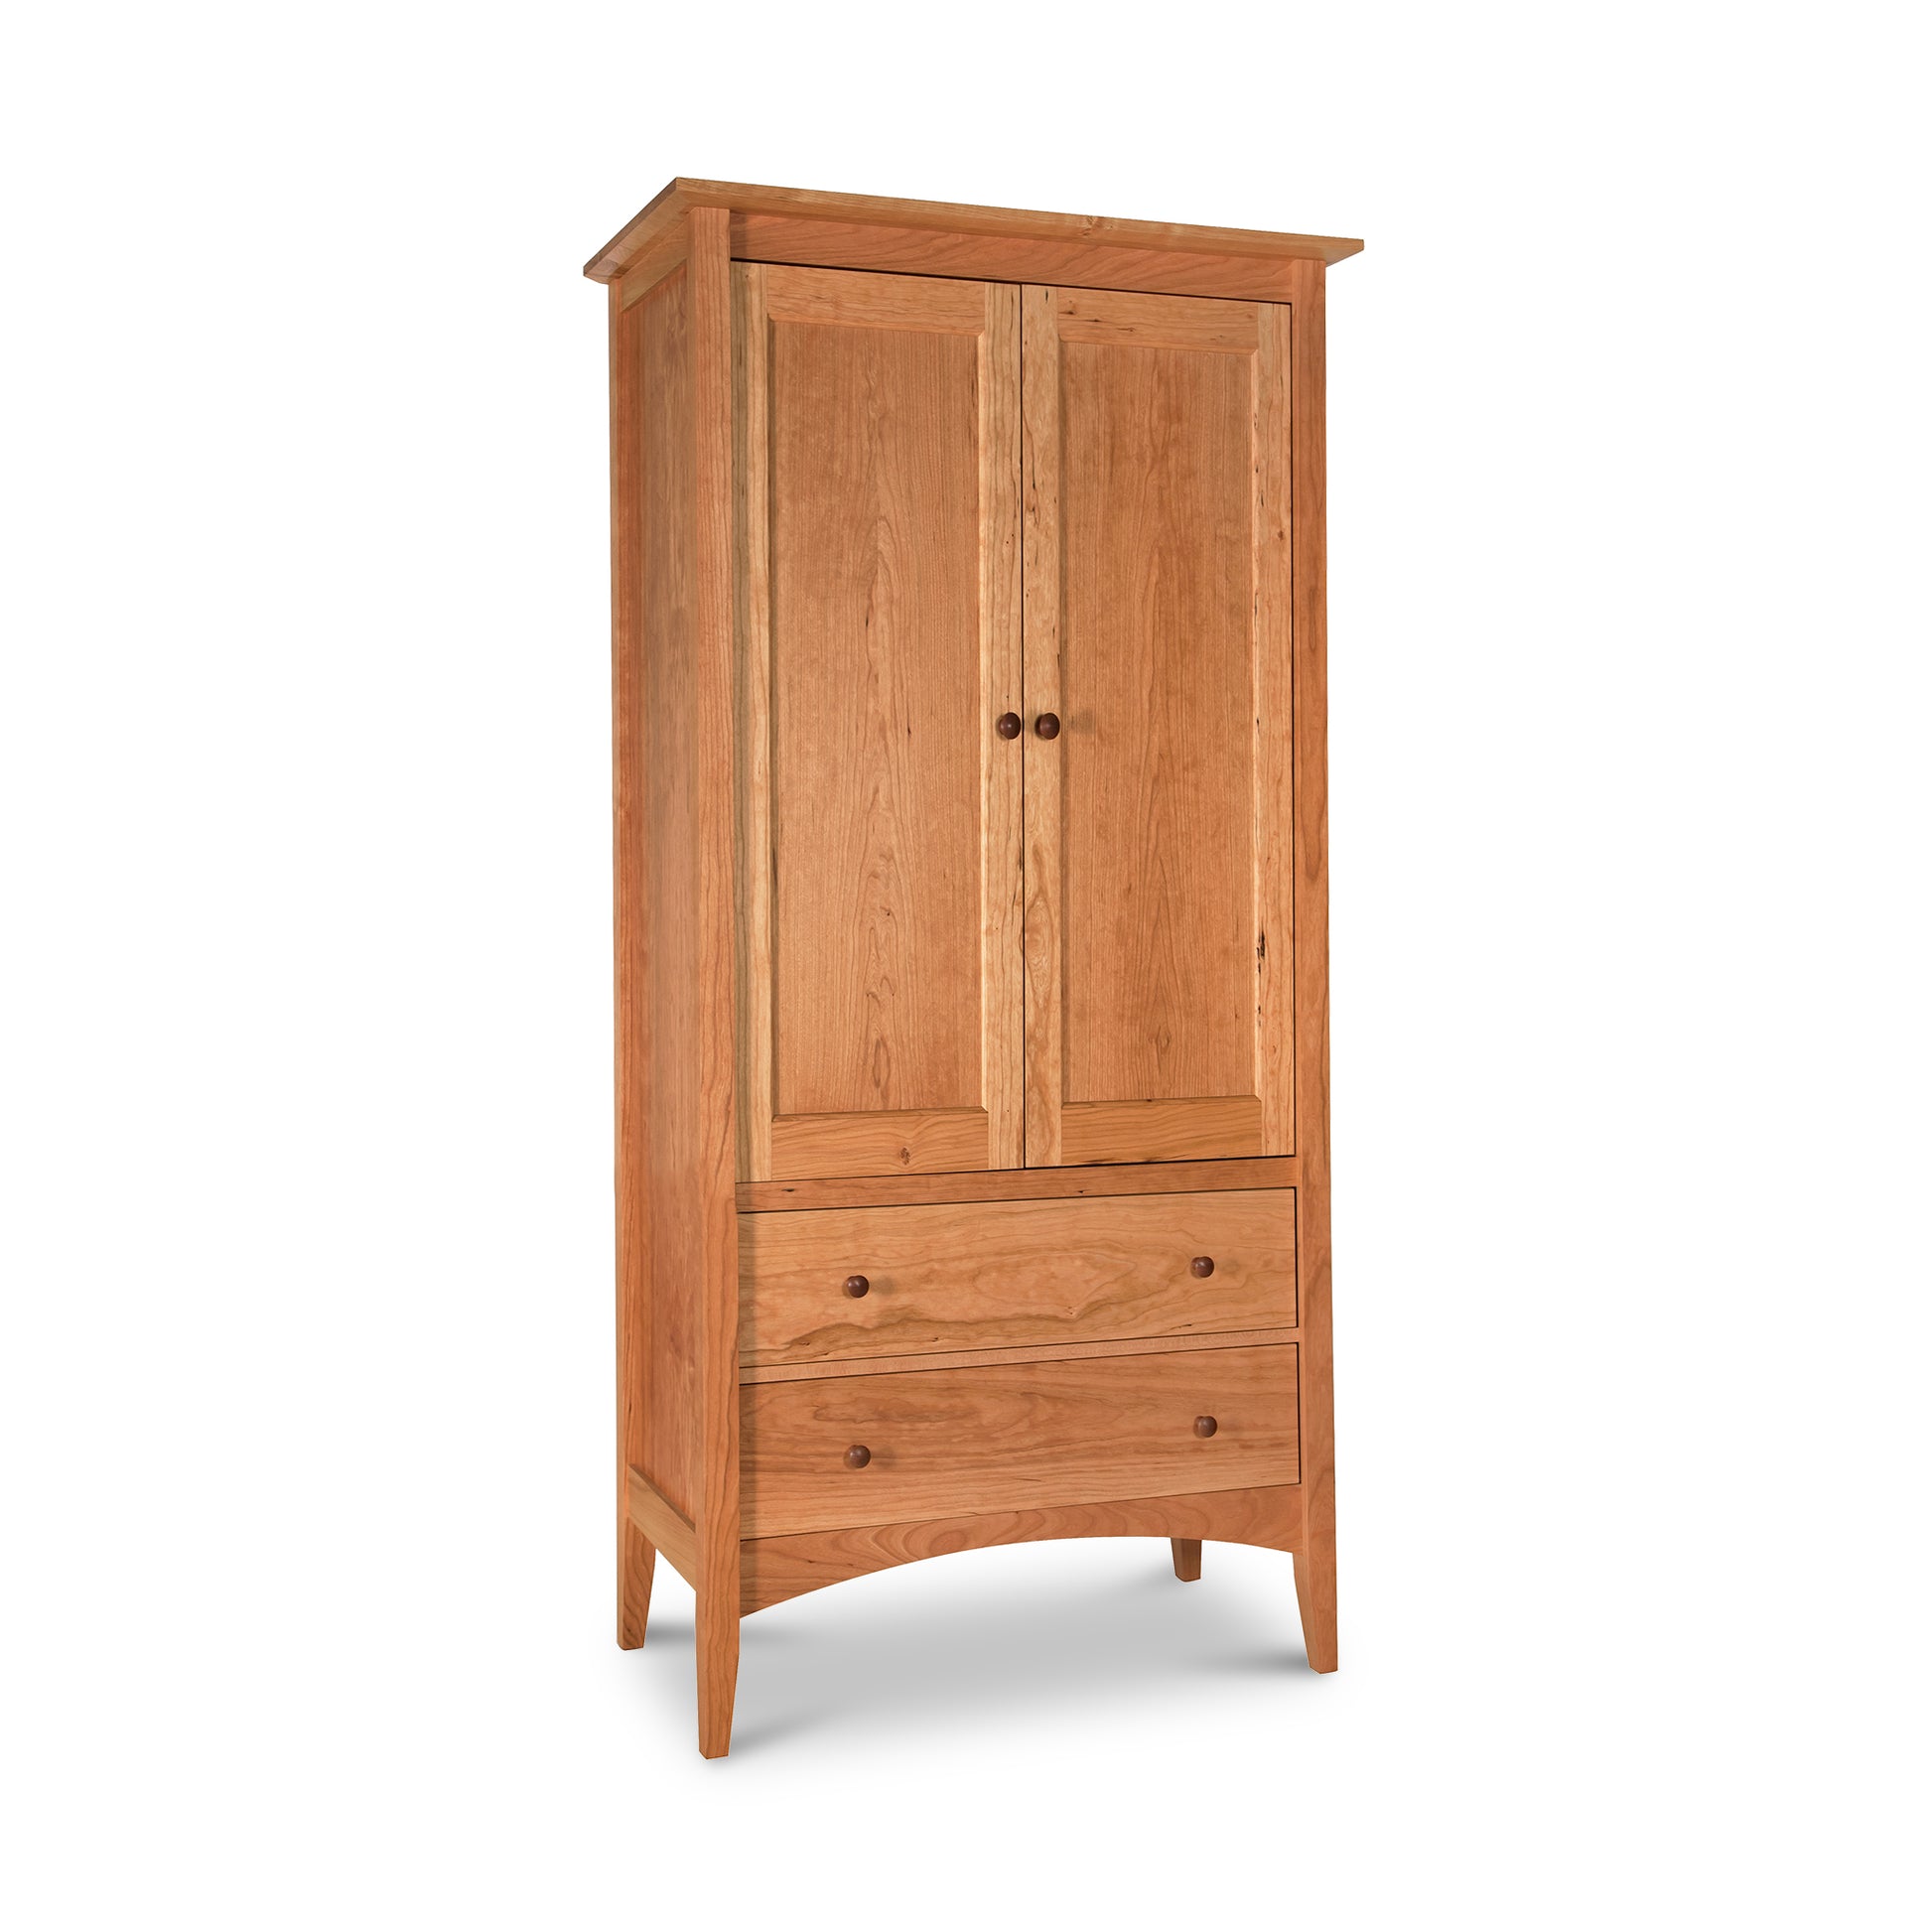 An American Shaker Armoire by Maple Corner Woodworks, made of solid wood and with two drawers.